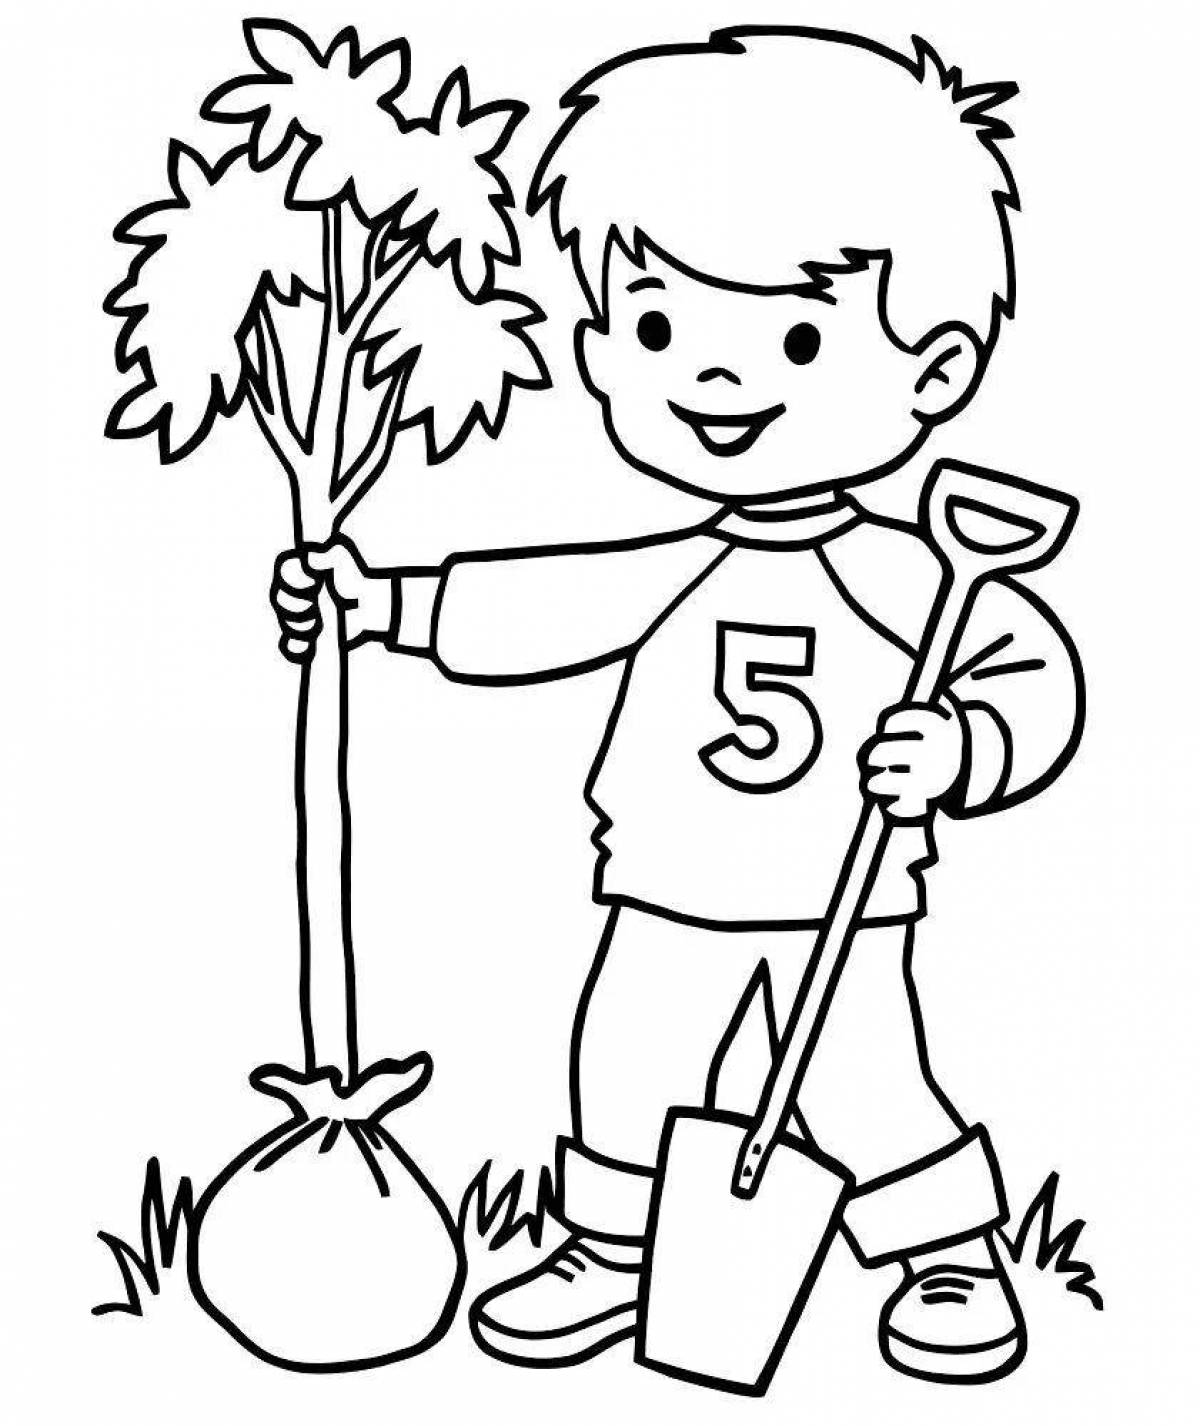 Coloring page happy ecologist